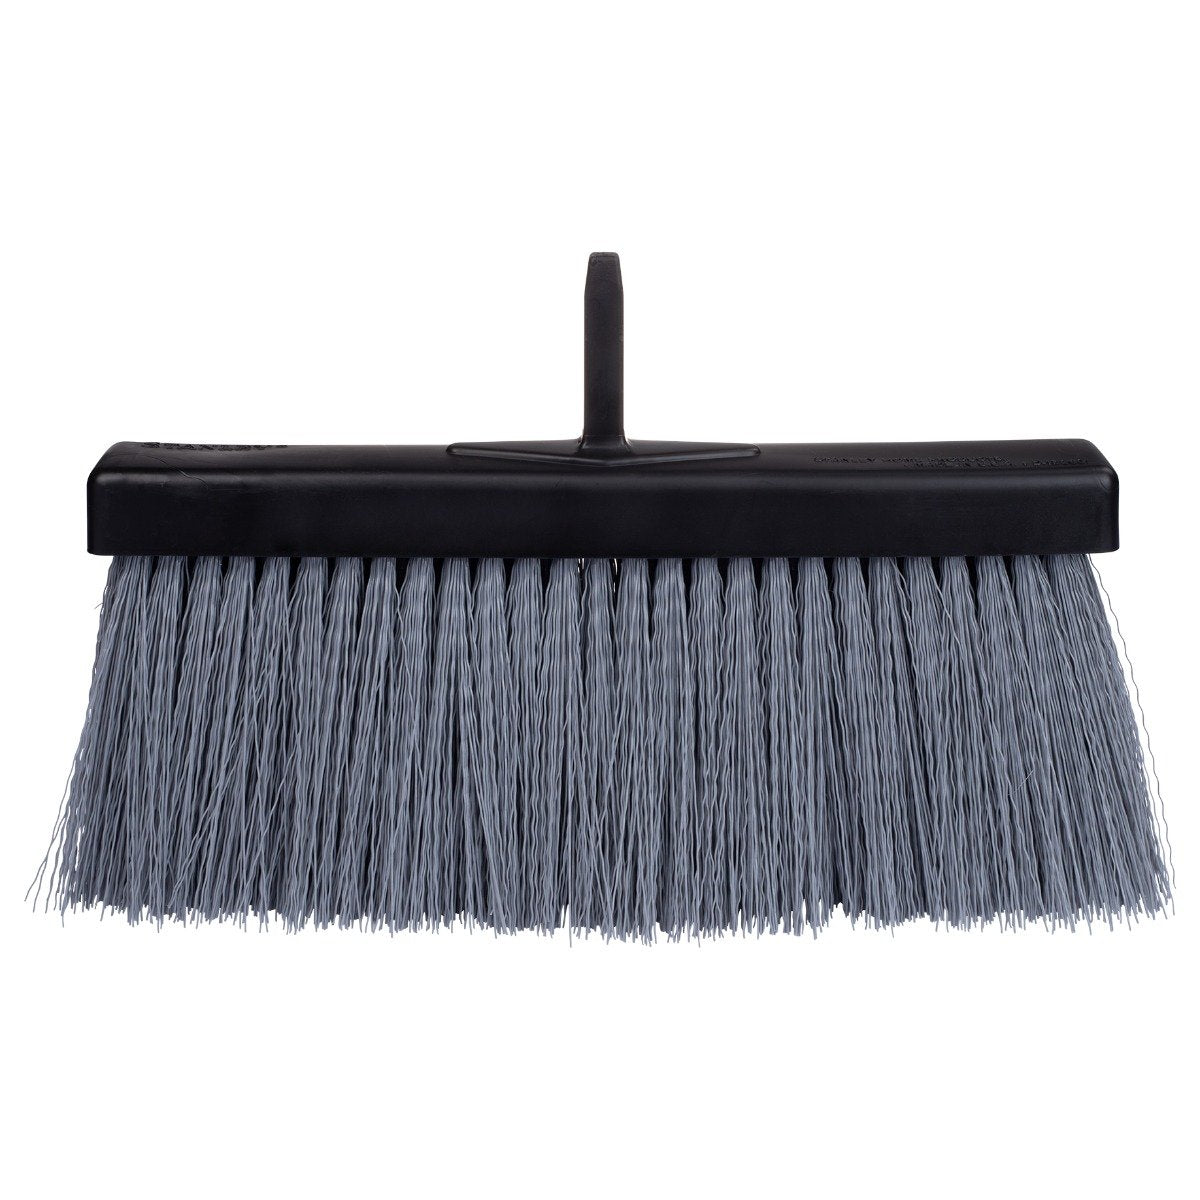 Stanely Black Slender Broom Head - Compact and Trim - For All Floors-Broom Accessory-Fuller Brush Company